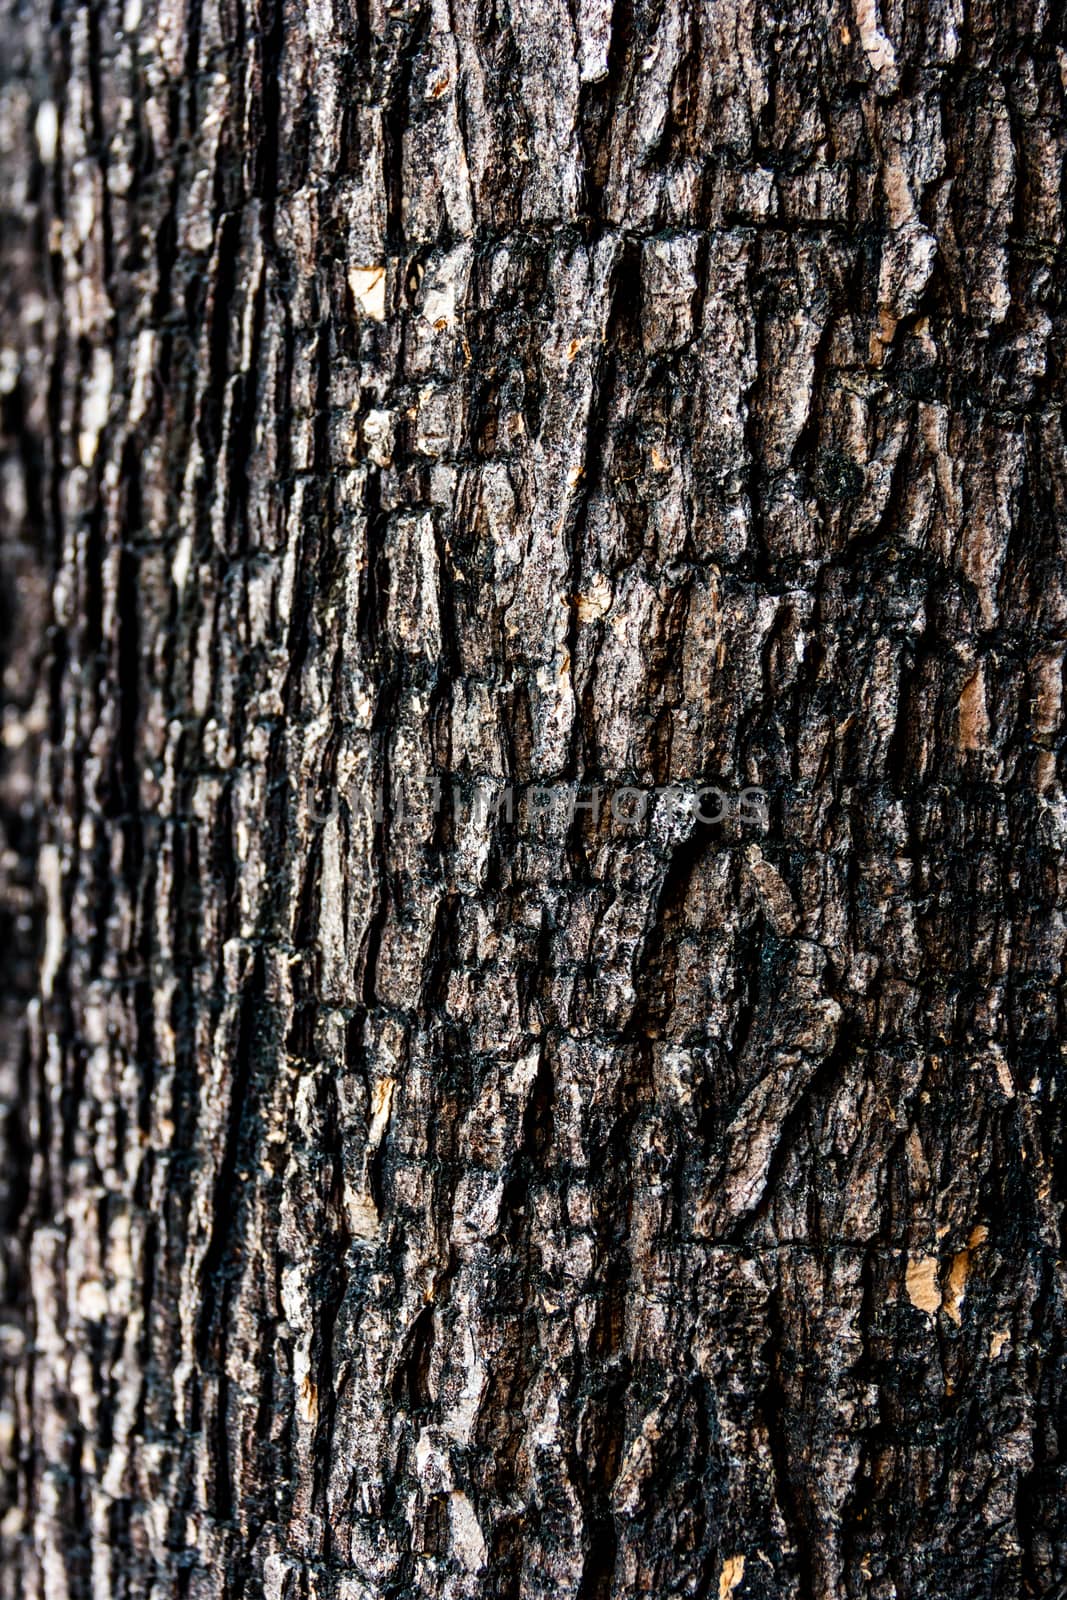 Bark of tree.Choose a focal point in the center of the image.